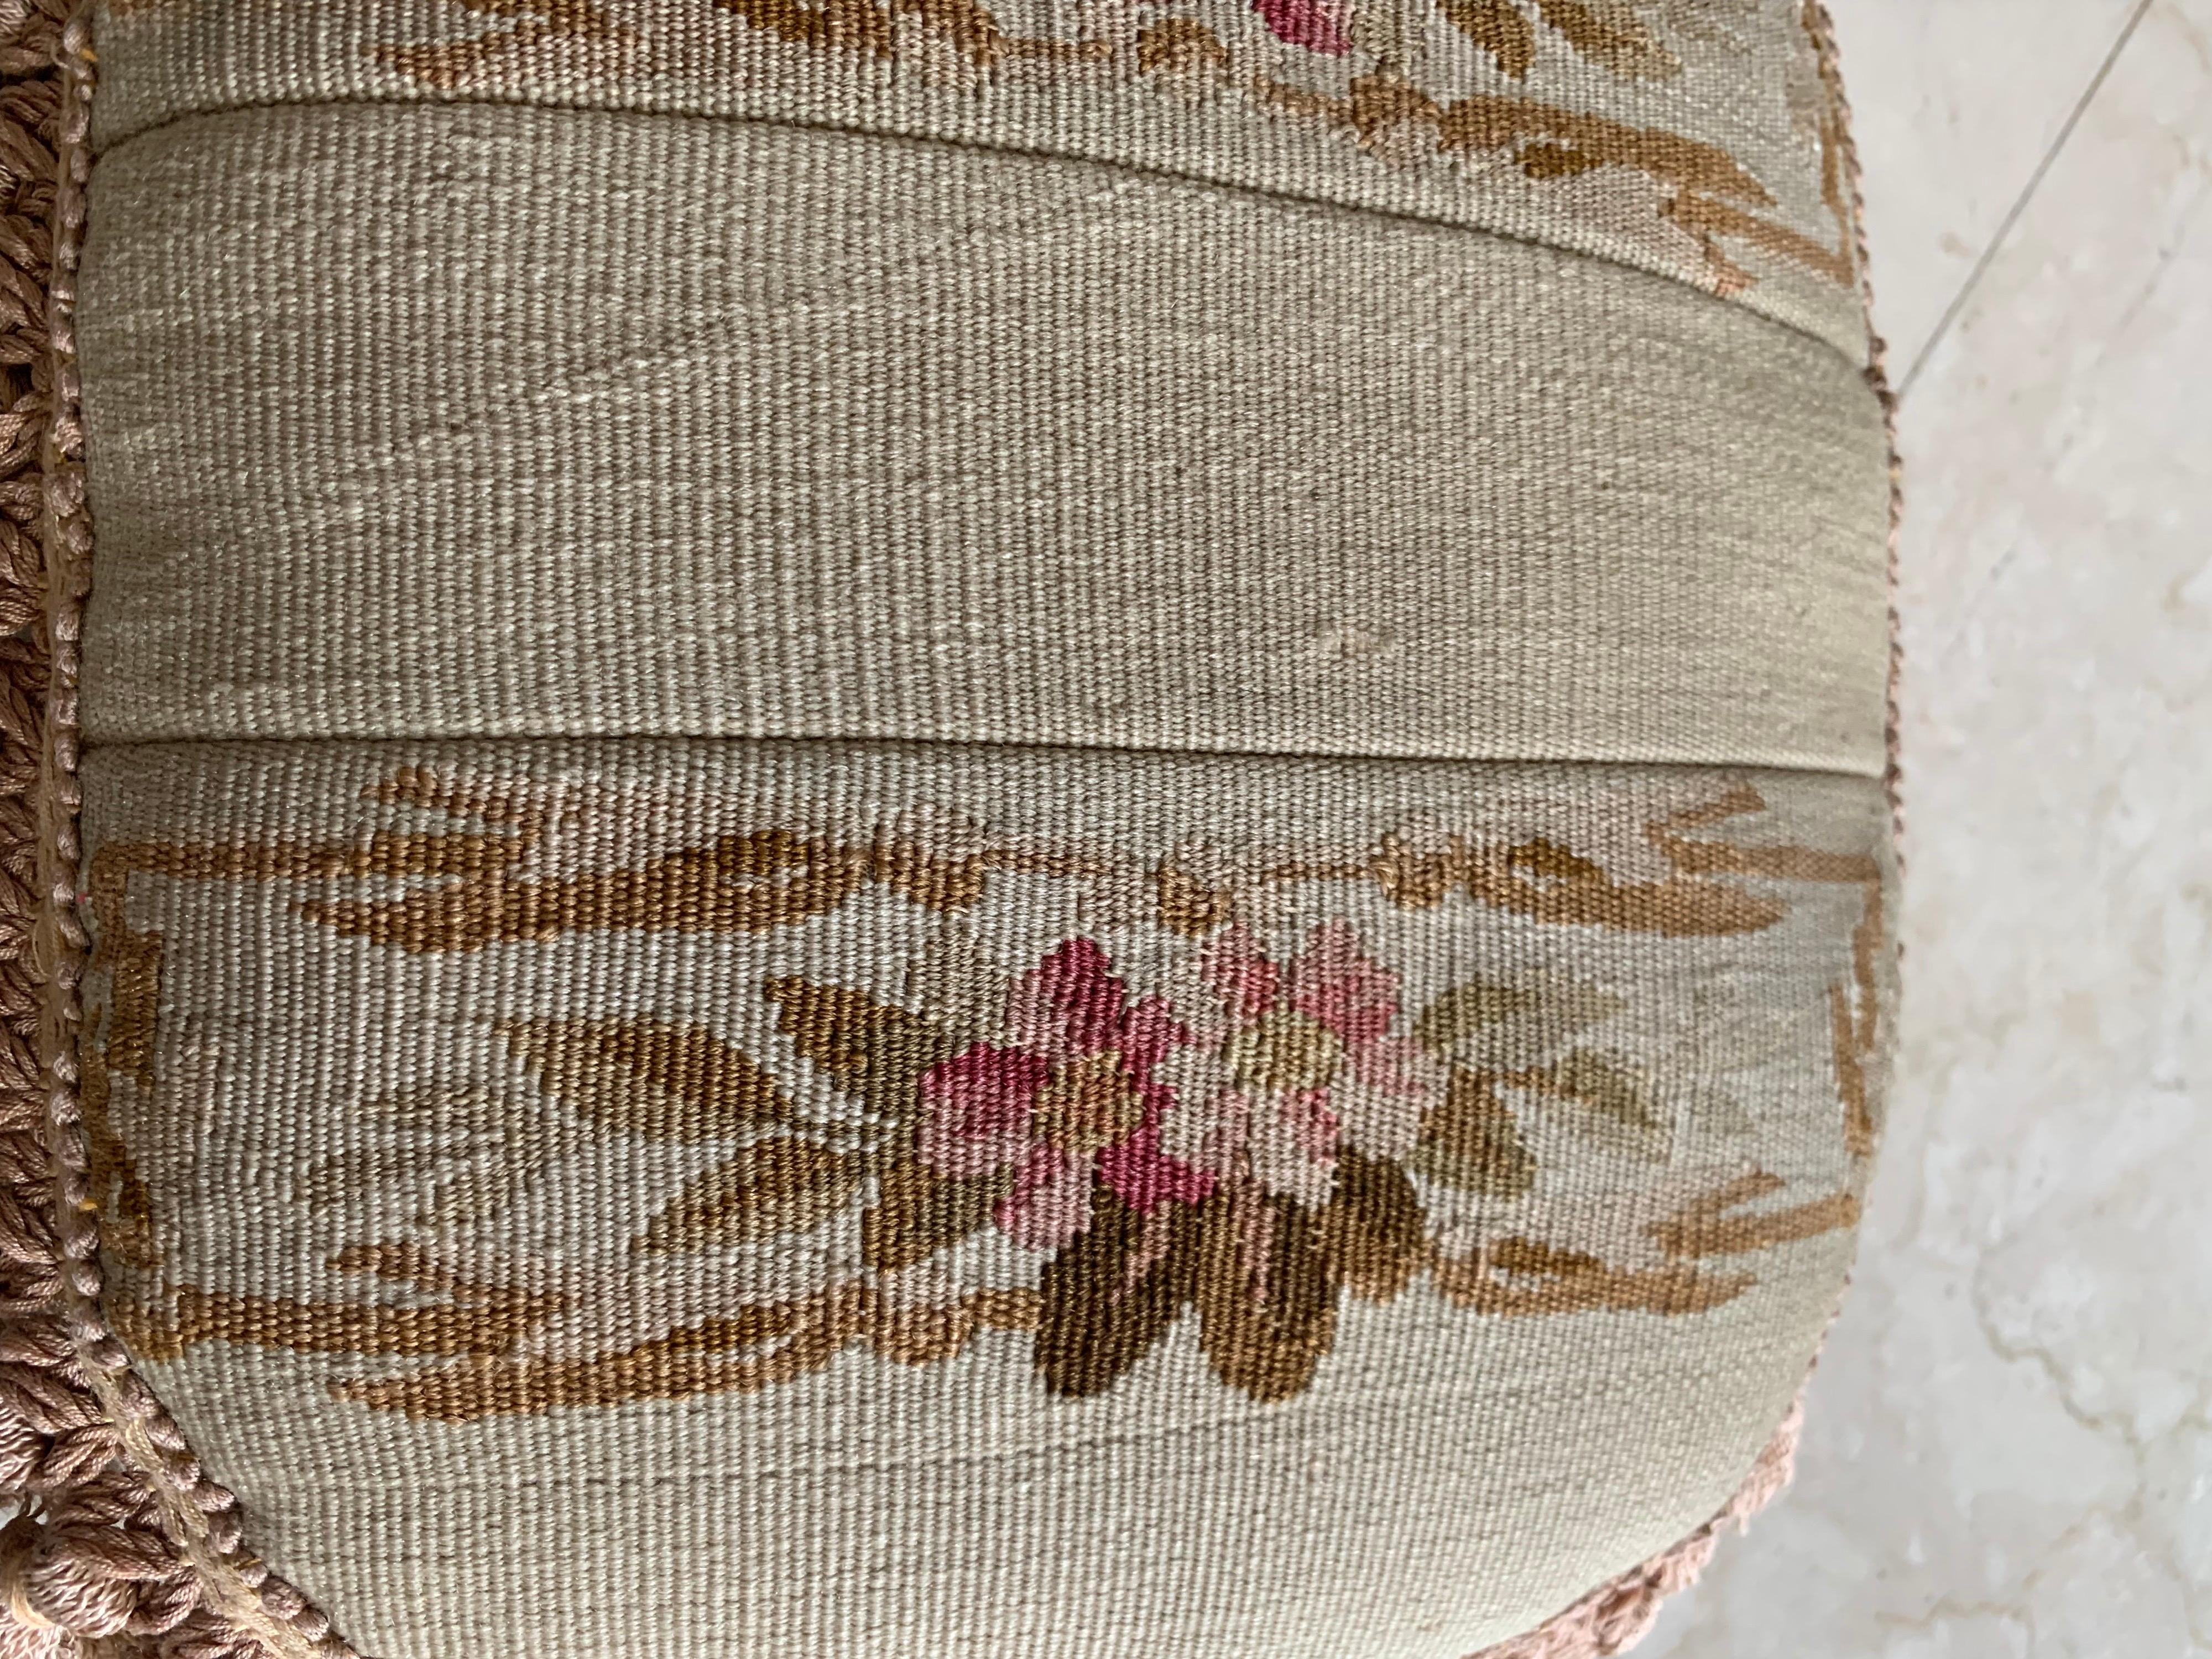 Aubusson Pair of 19th Century French Tapestry Pillows with Foliage Petite Tassels For Sale